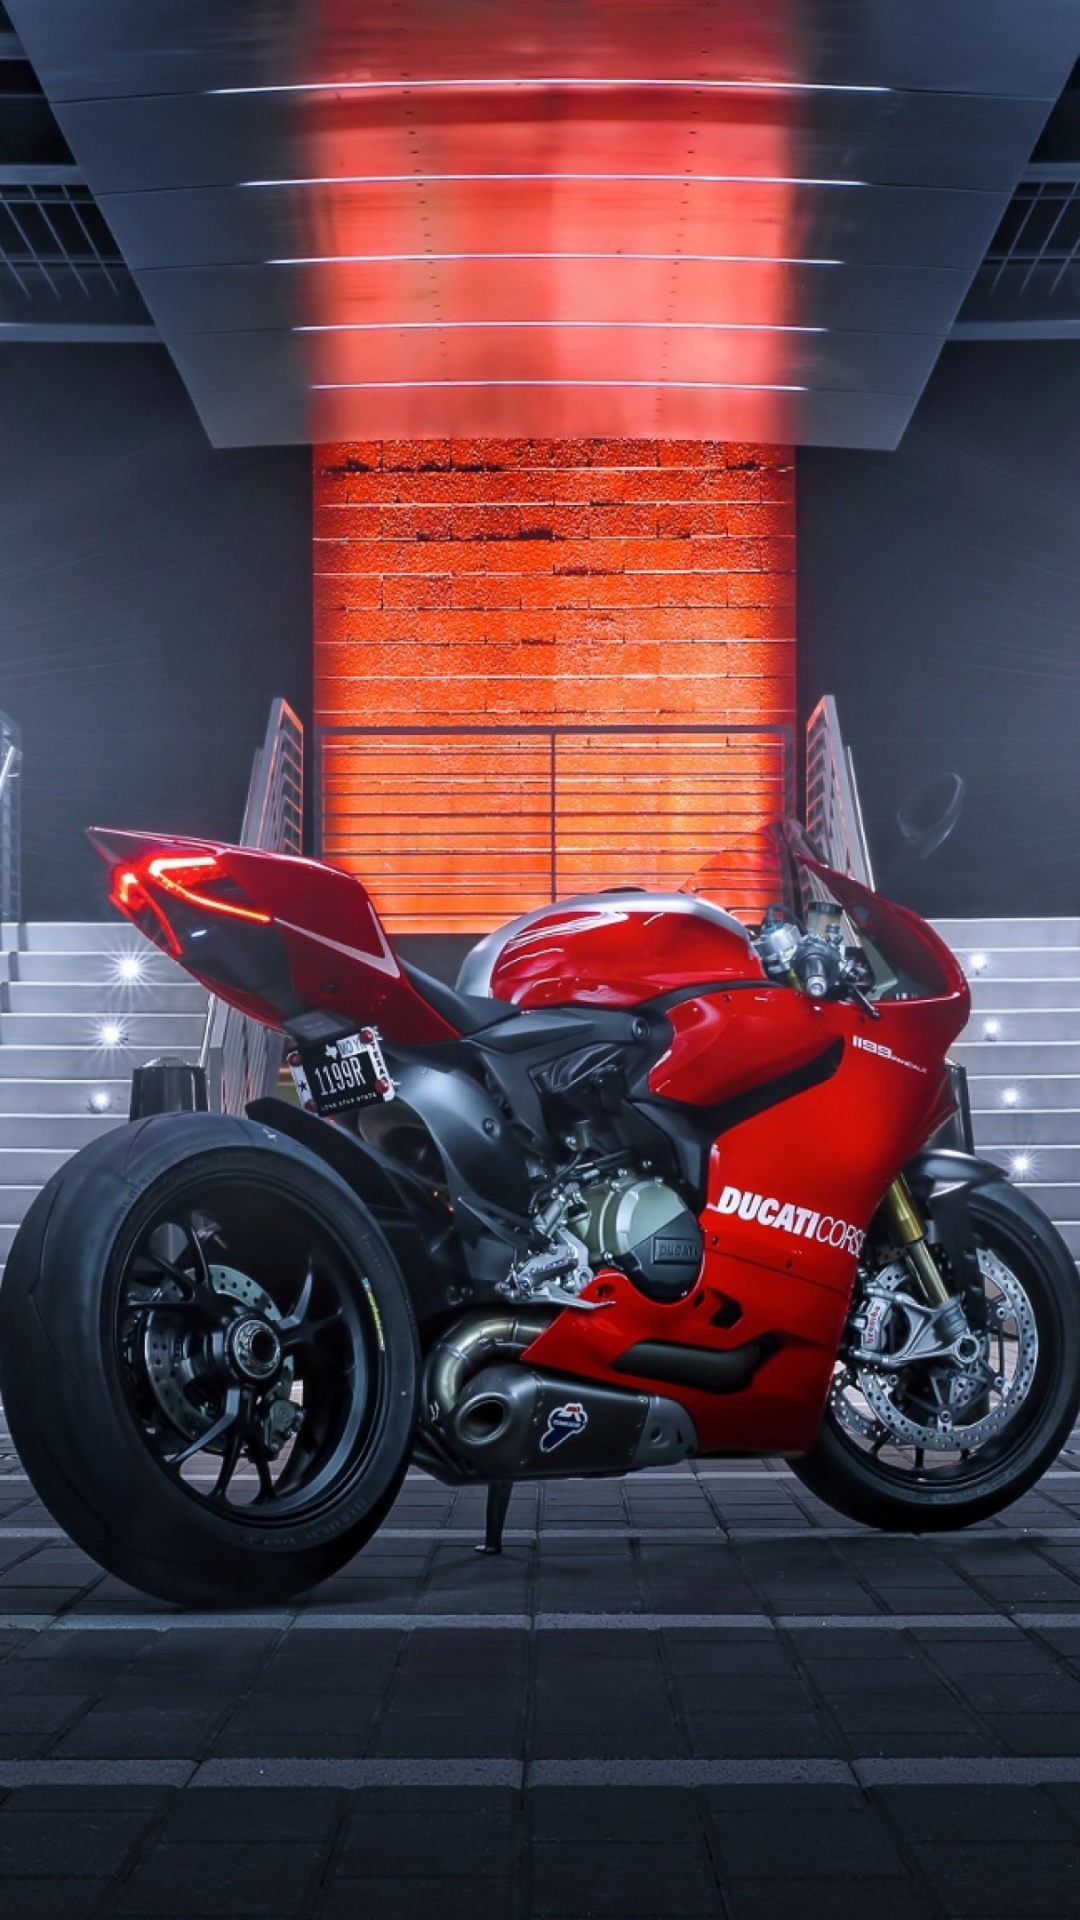 Ducati Wallpapers 73 pictures